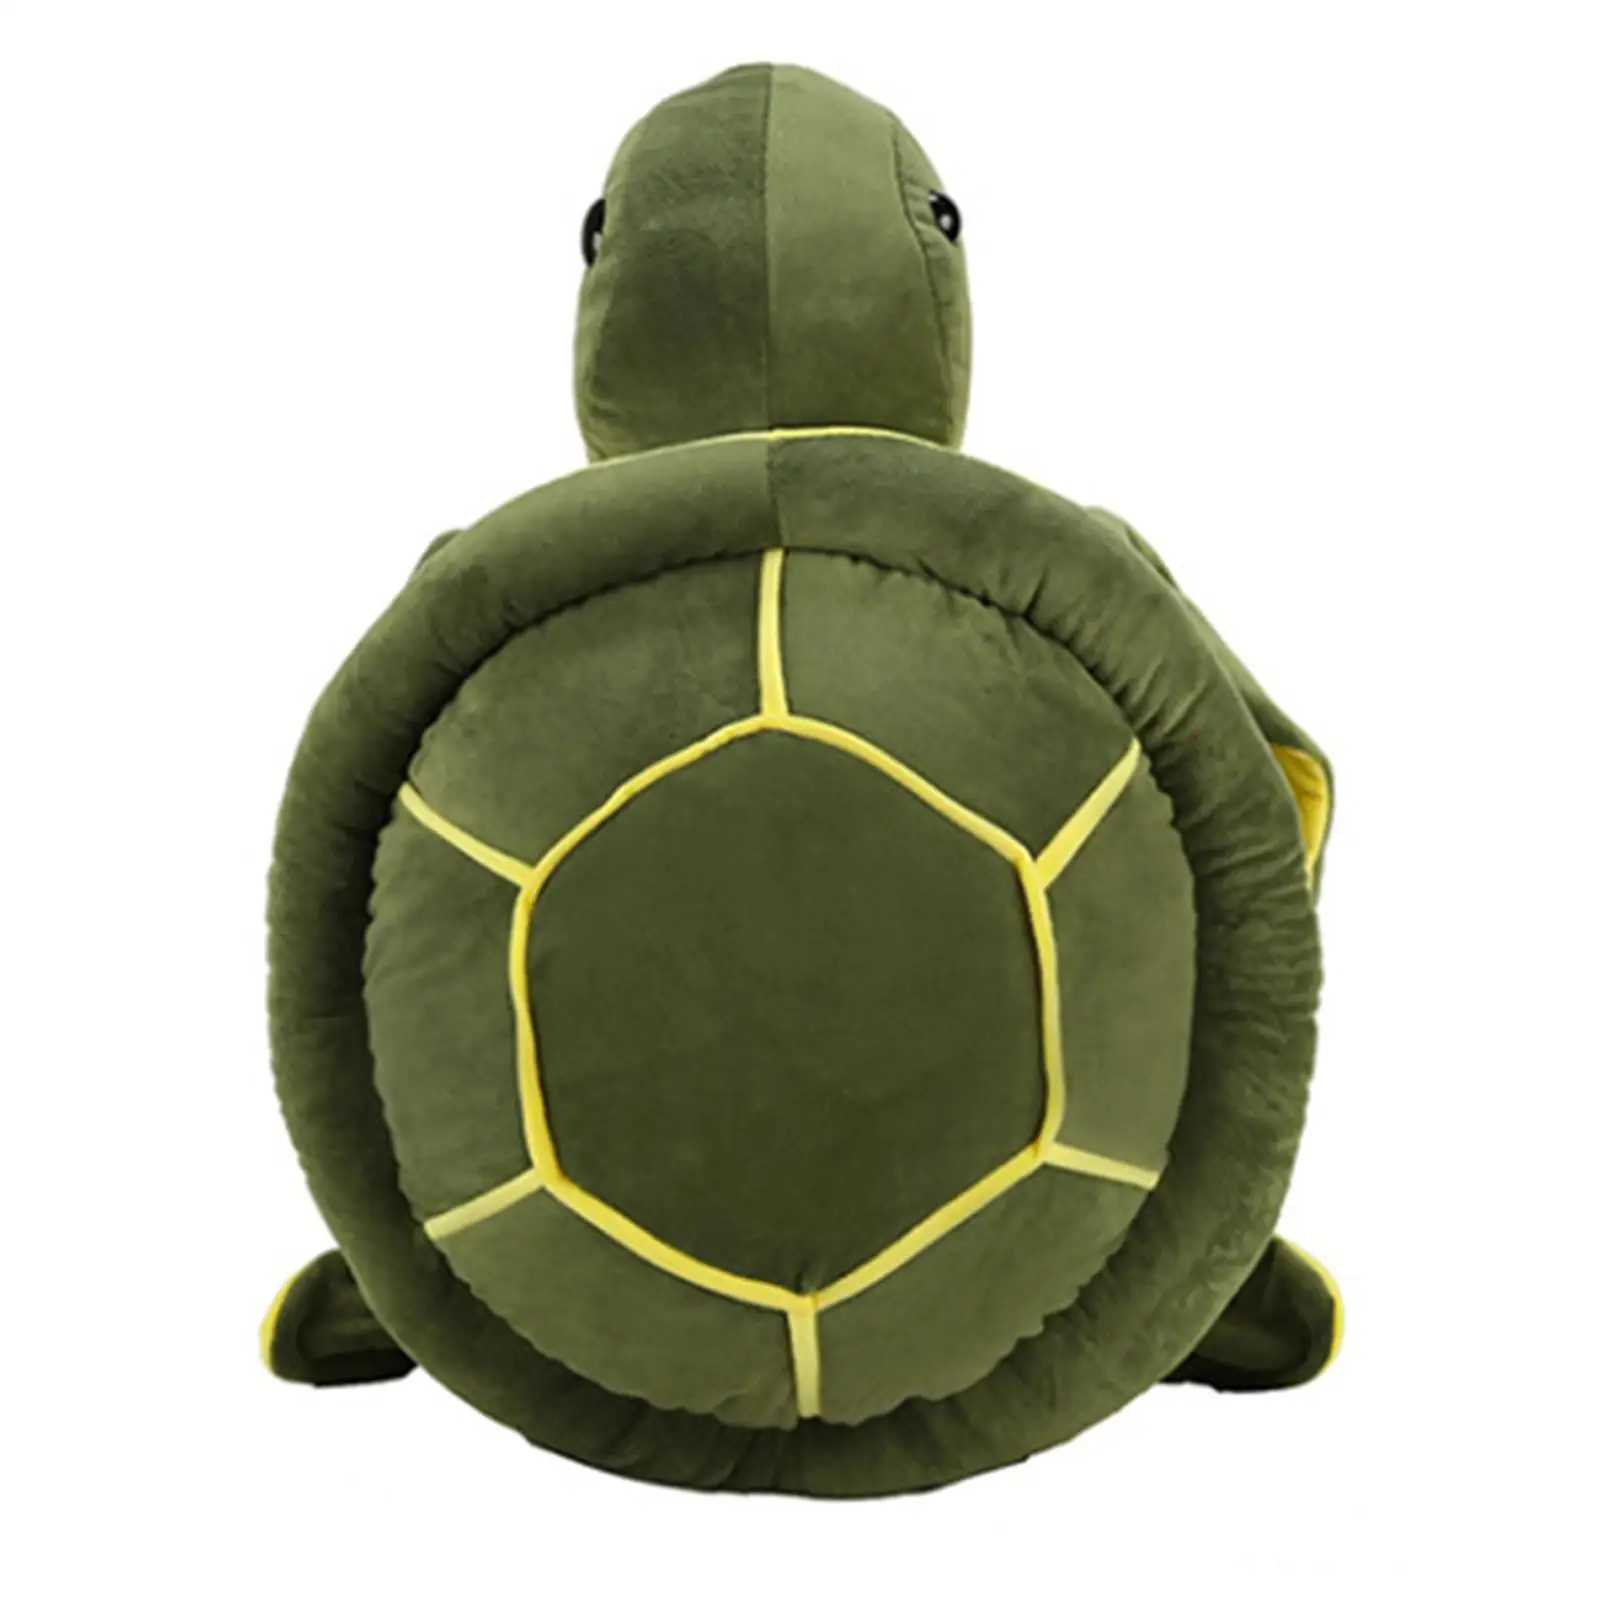 Soft Skiing Protector Gear Protection Turtle Shape Stuffed Waterproof Cute for Gifts